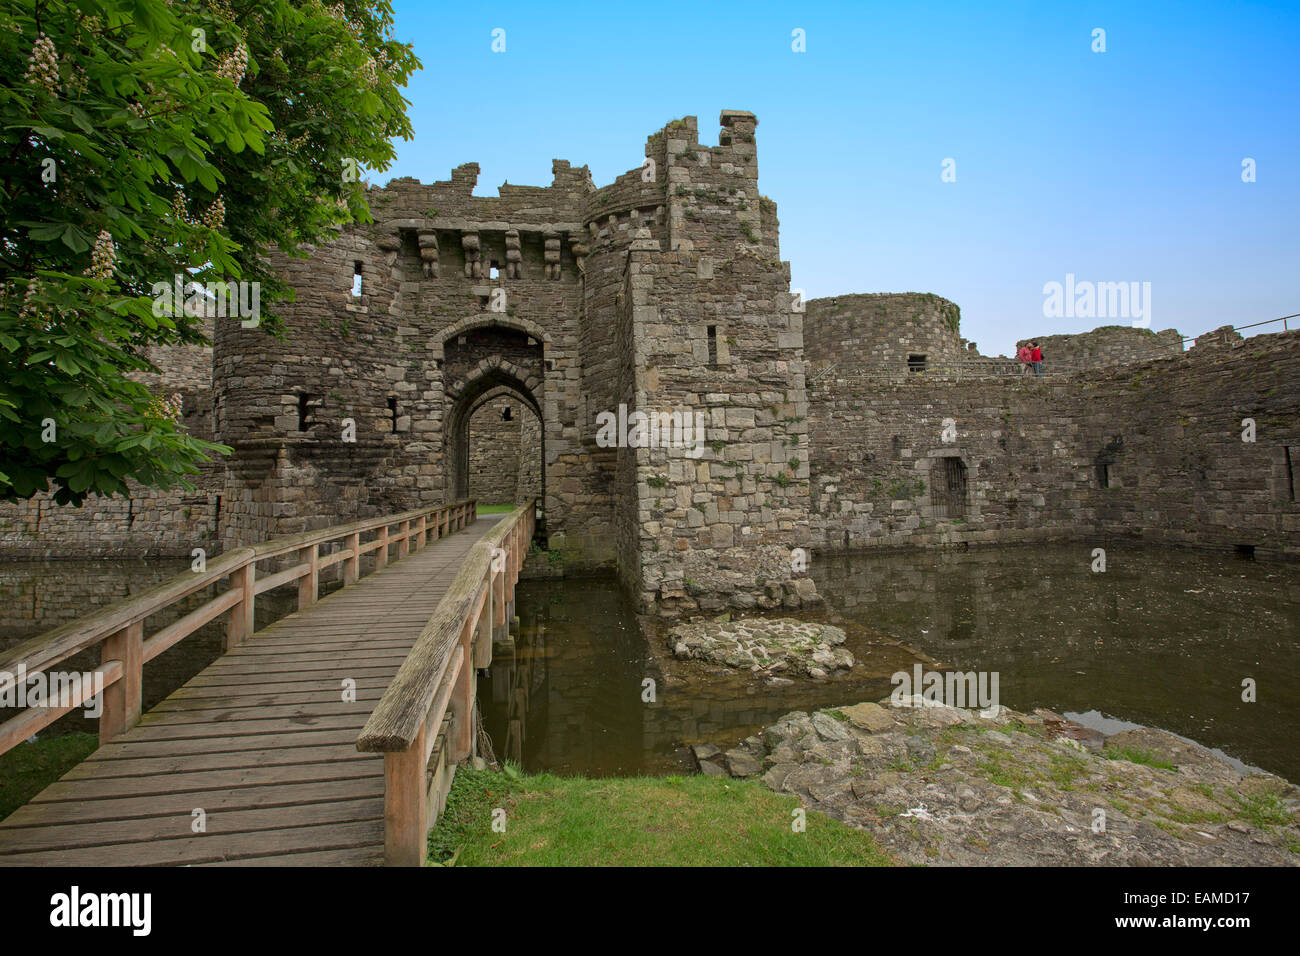 Impressive entrance & wooden bridge over moat at well preserved ruins of historic Beaumaris castle under blue sky in Wales Stock Photo